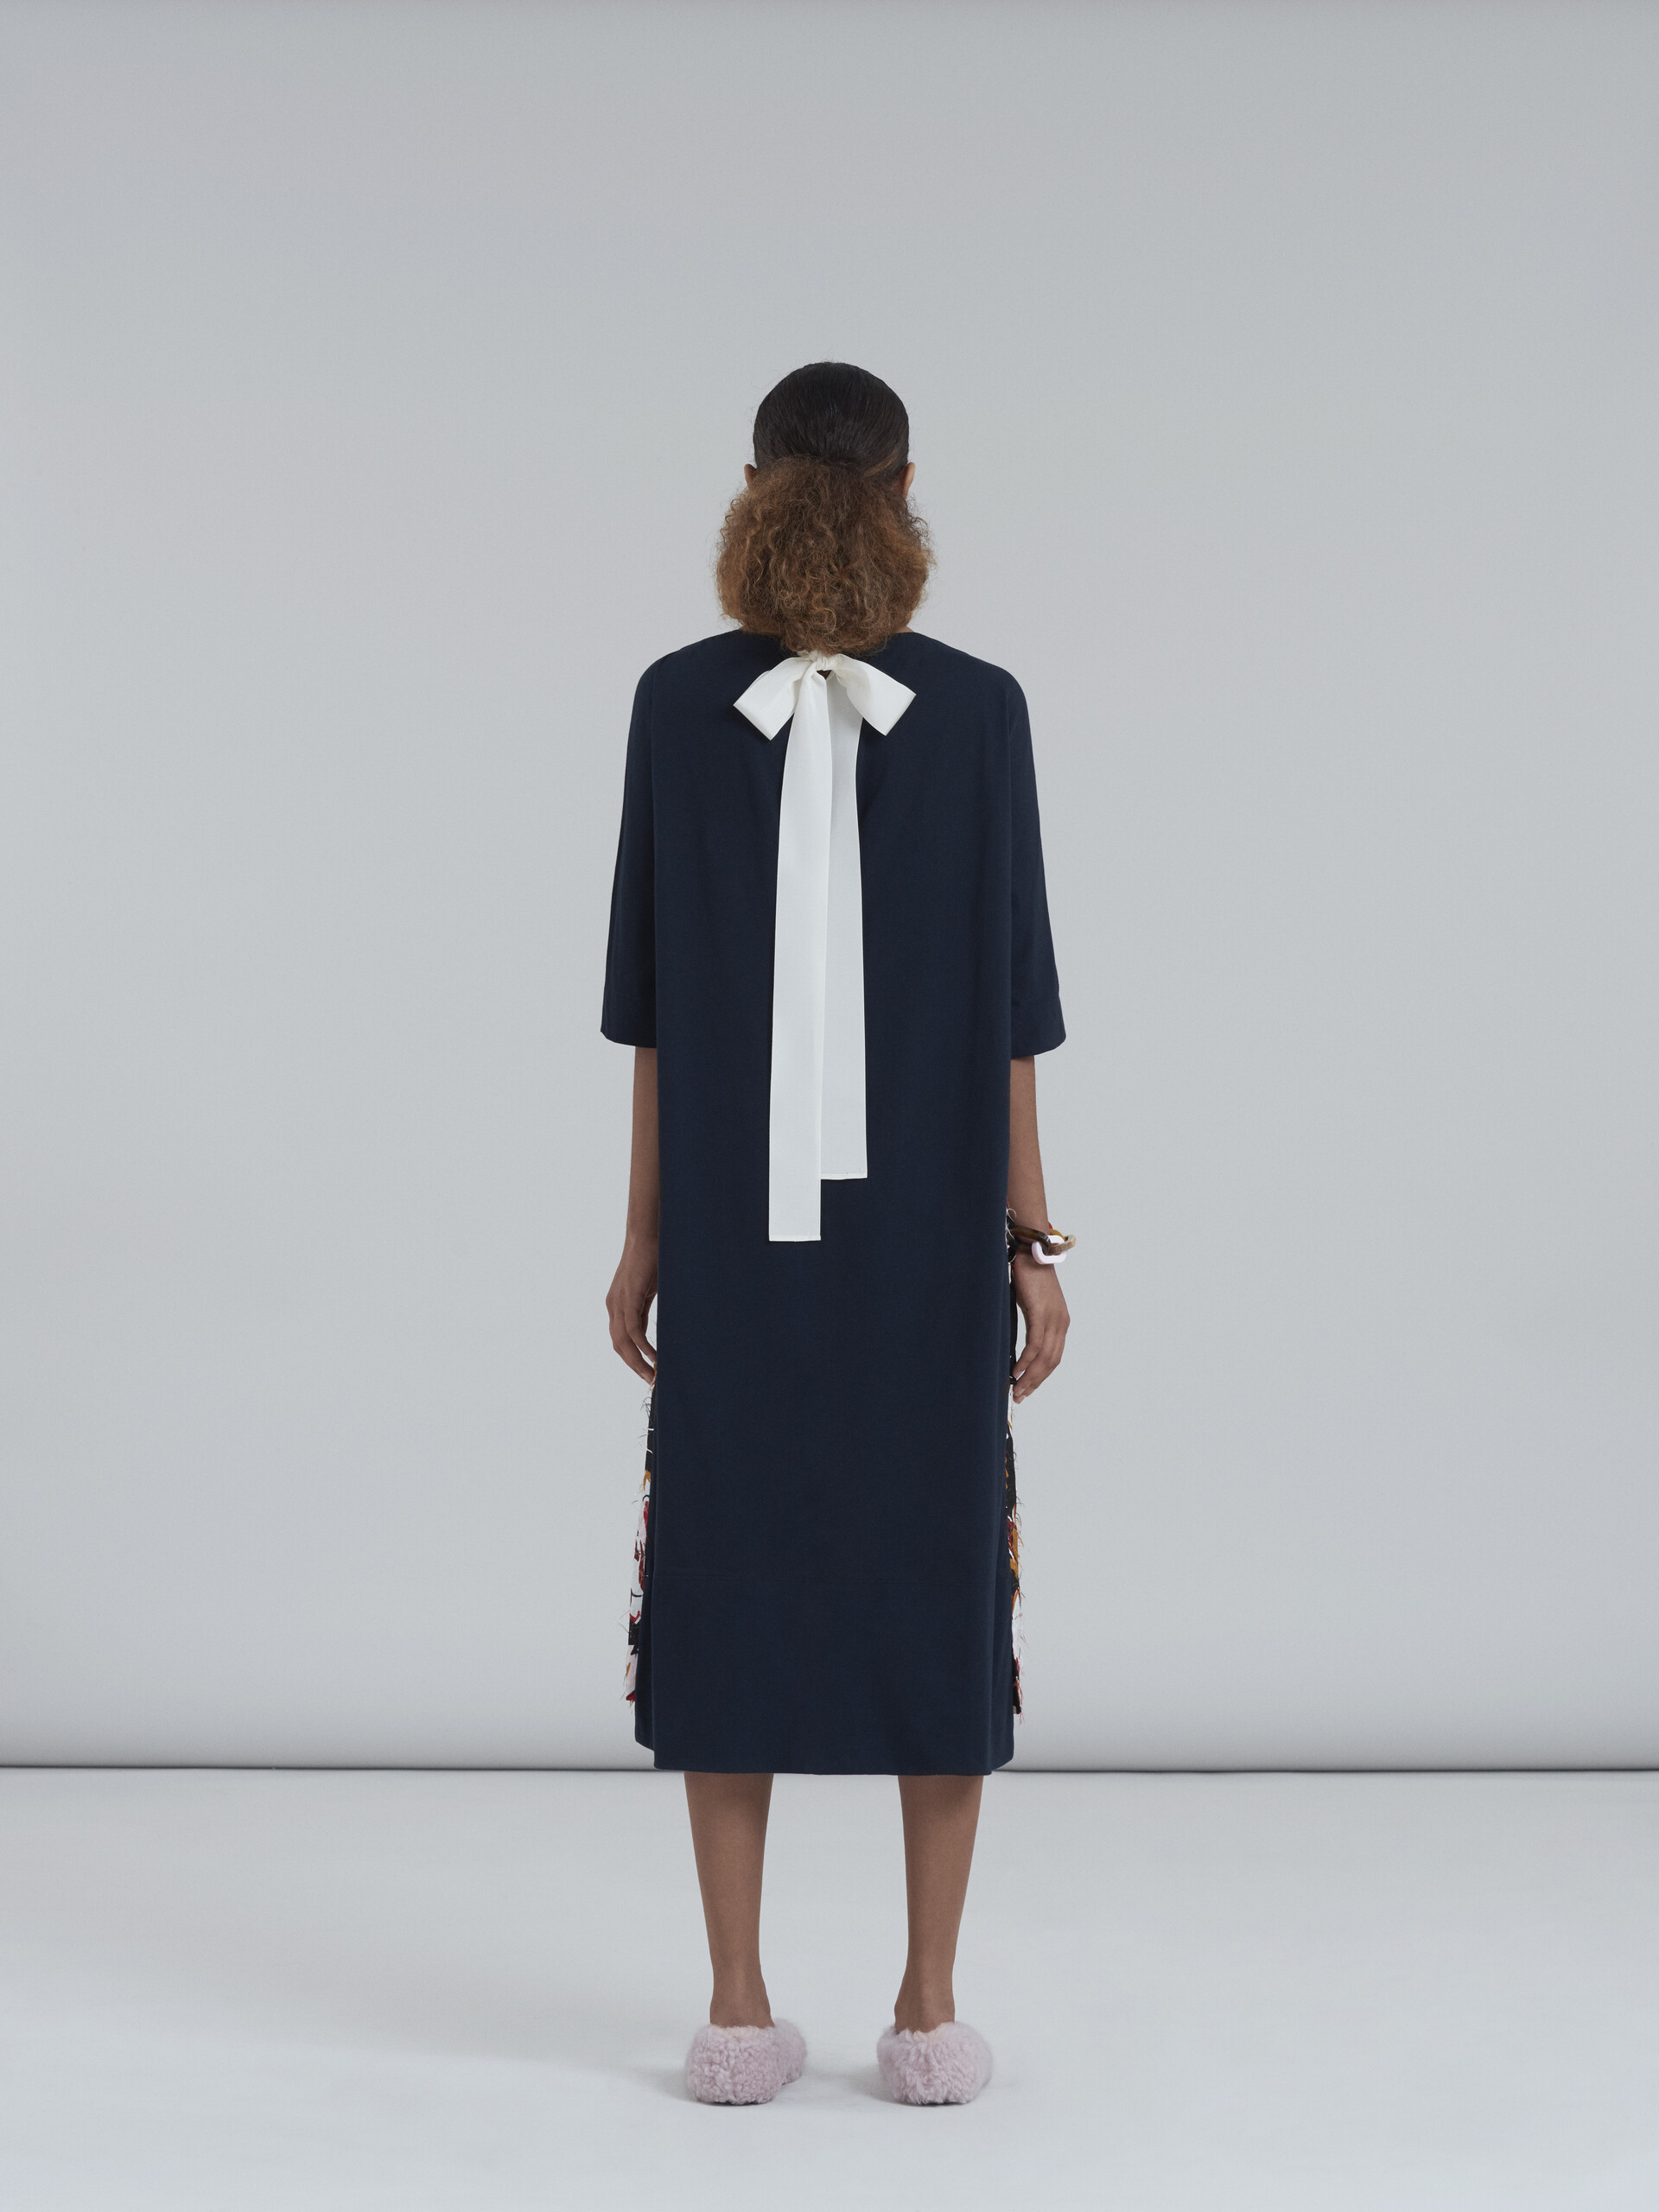 Organic cotton jersey dress with contrast bow - Dresses - Image 3